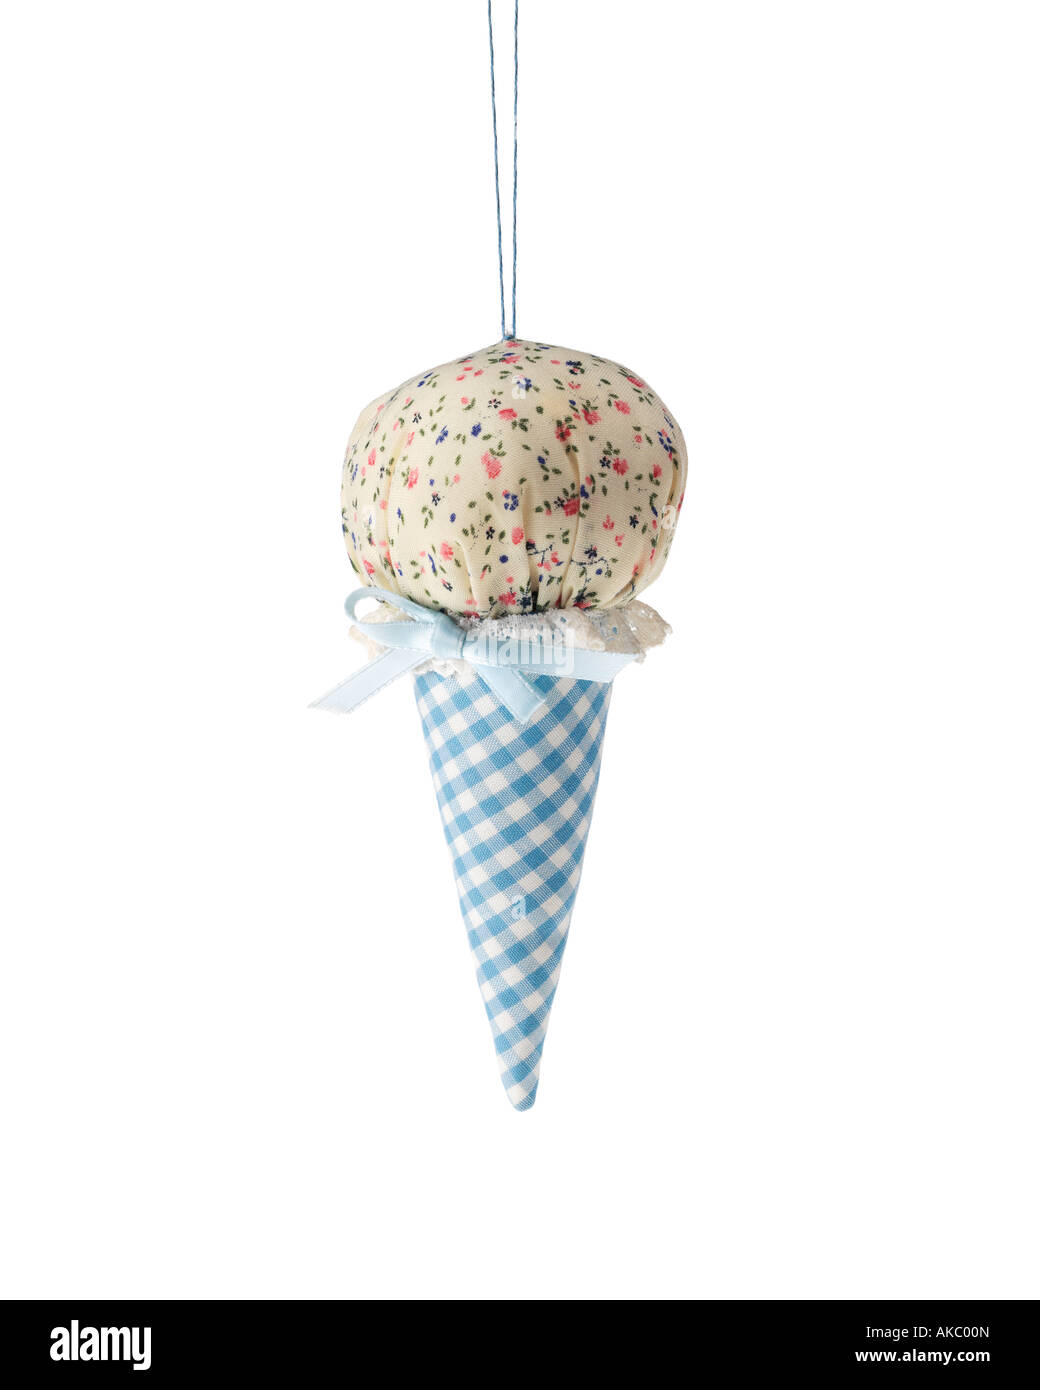 Ice cream cone Christmas ornament Banque D'Images